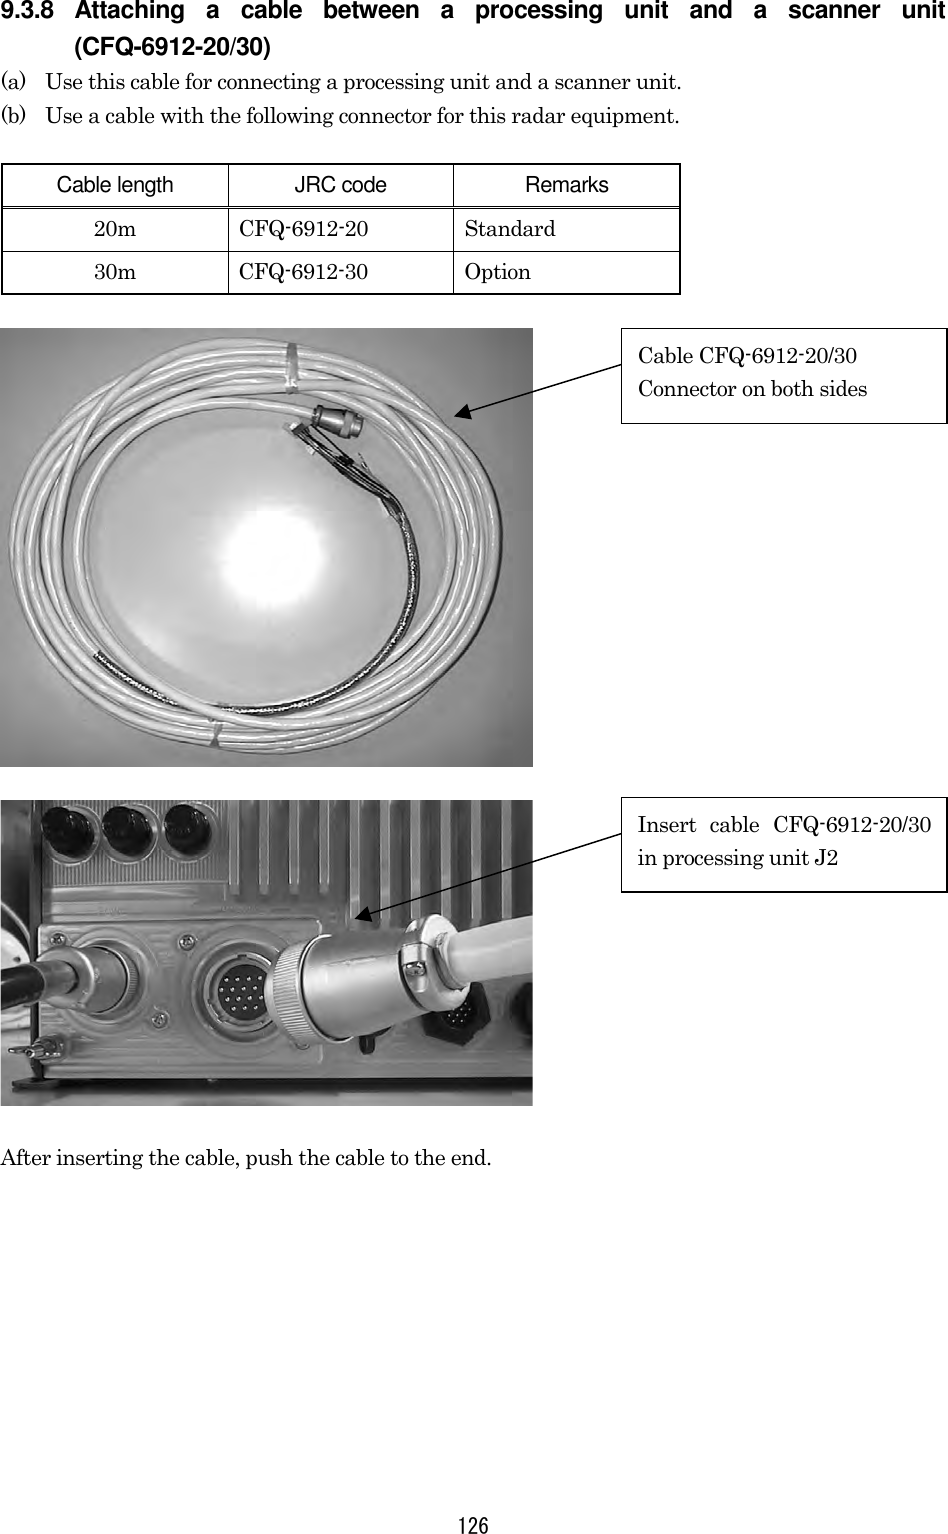  126 9.3.8 Attaching a cable between a processing unit and a scanner unit (CFQ-6912-20/30) (a)  Use this cable for connecting a processing unit and a scanner unit. (b)  Use a cable with the following connector for this radar equipment.  Cable length  JRC code  Remarks 20m CFQ-6912-20 Standard 30m CFQ-6912-30 Option   After inserting the cable, push the cable to the end. Cable CFQ-6912-20/30 Connector on both sides Insert cable CFQ-6912-20/30in processing unit J2 